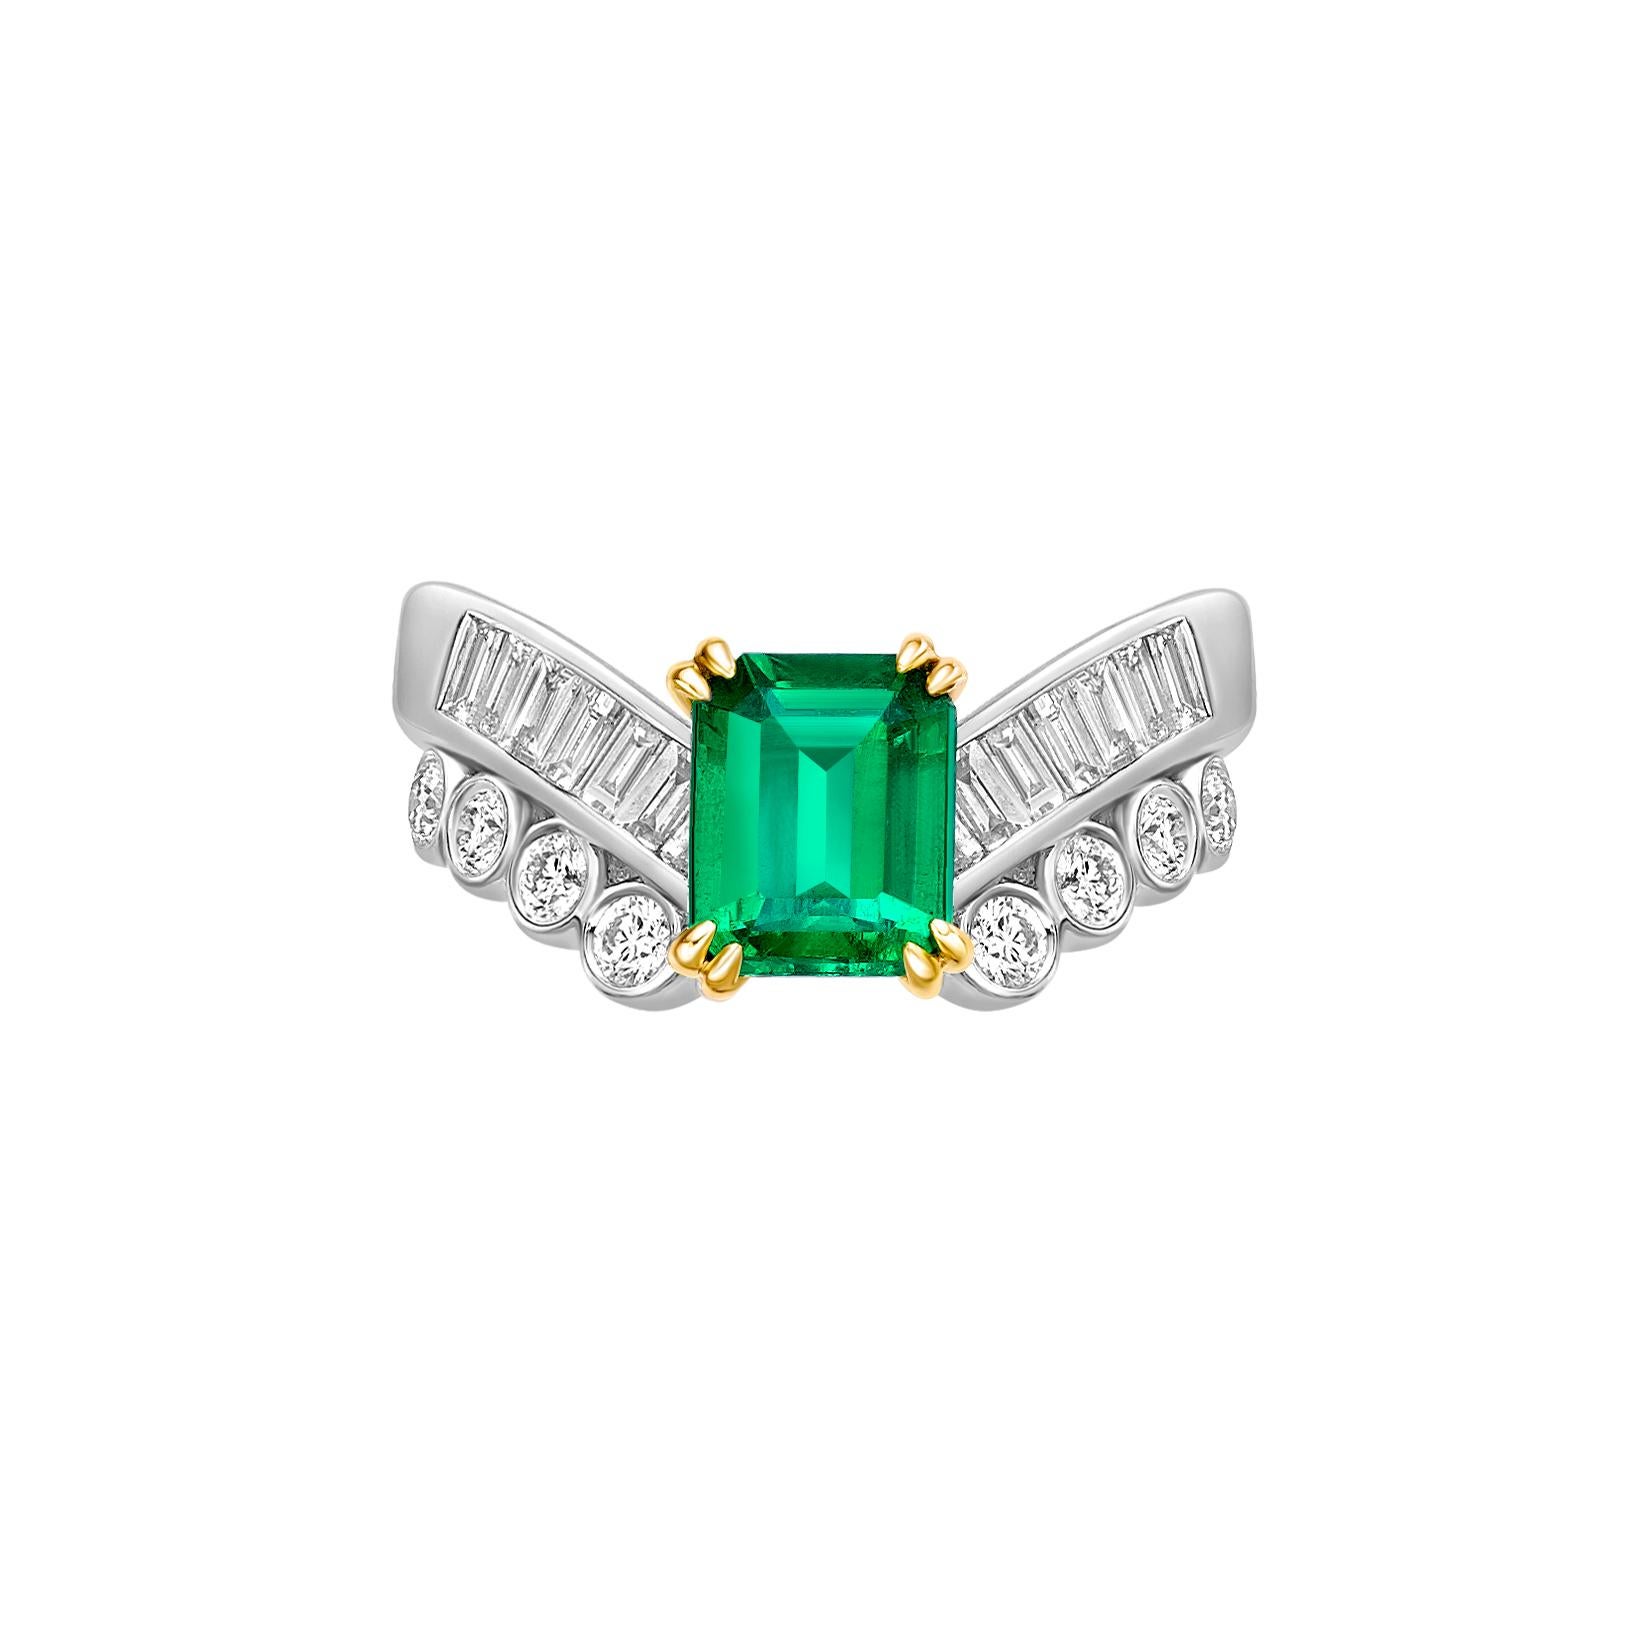 Contemporary 1.15 Carat Emerald Fancy Ring in 18Karat White Yellow Gold with White Diamond. For Sale